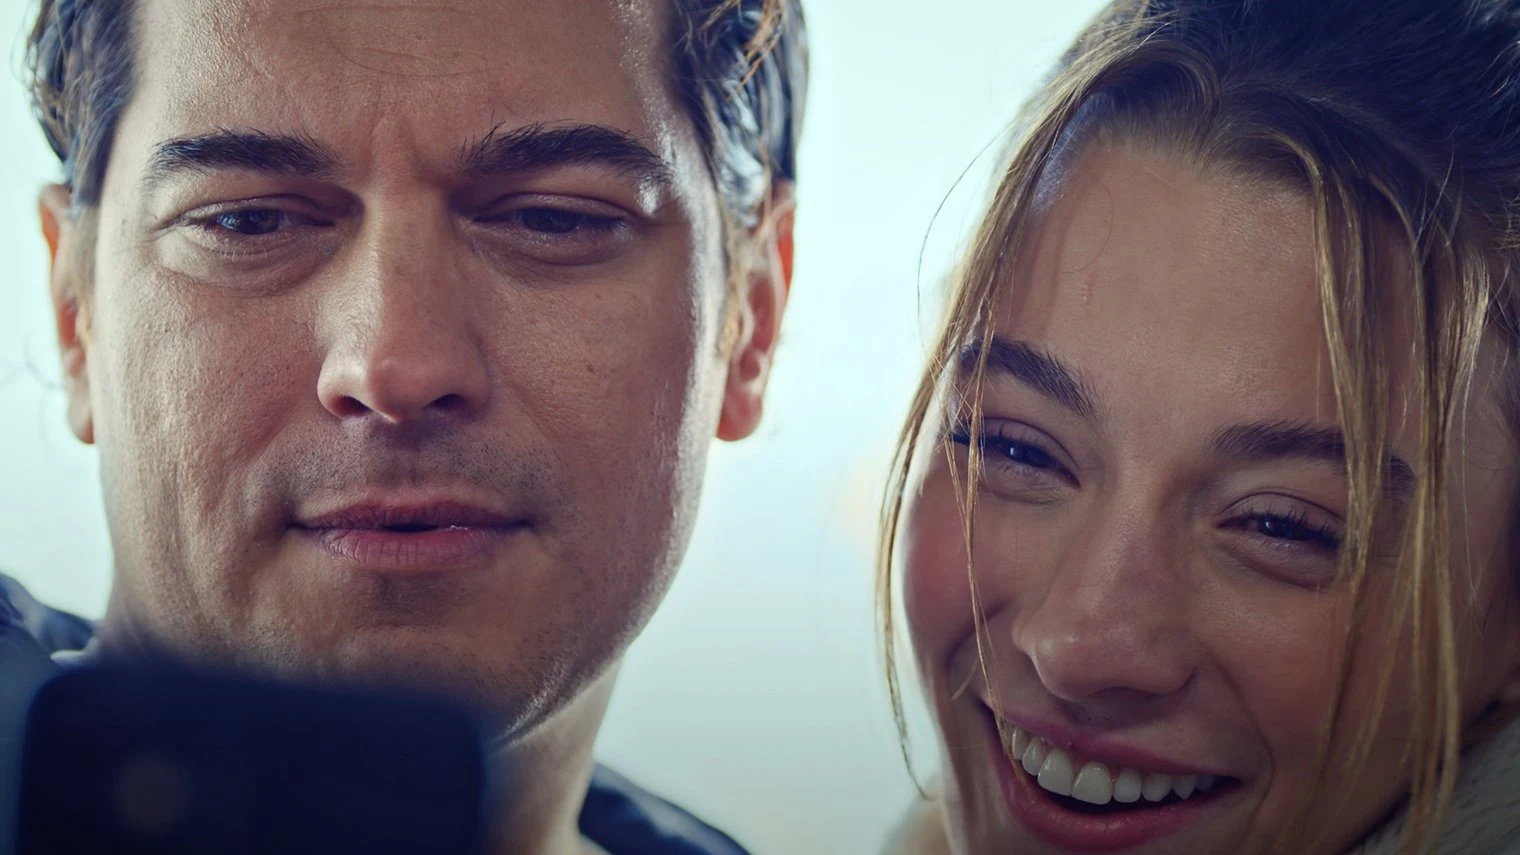 Çağatay Ulusoy Returns to TV Screens with 'Gaddar' – What is the Plot?